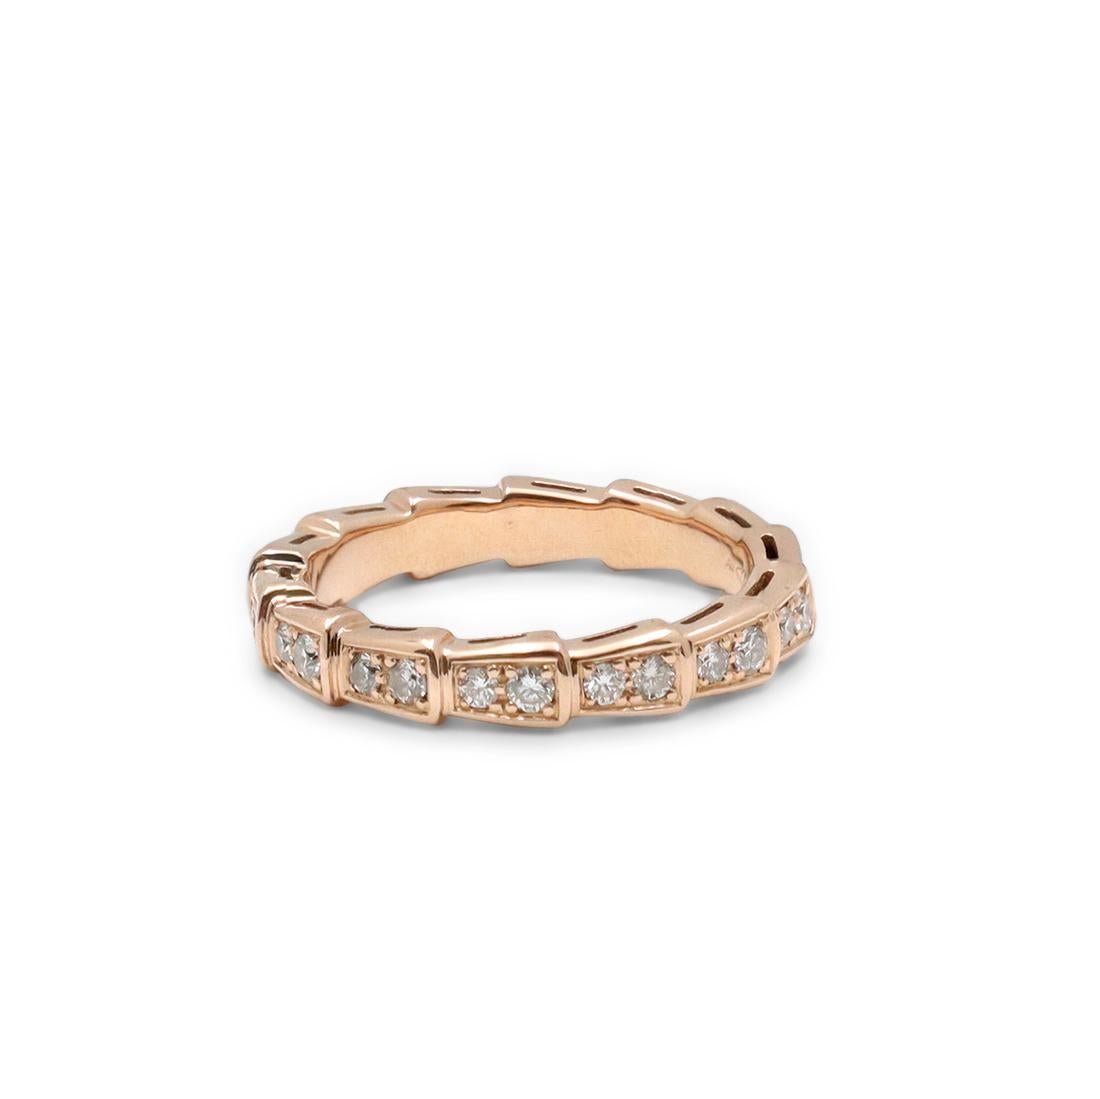 Authentic Bvlgari 'Serpenti Viper' ring crafted in 18 karat rose gold coils around the finger featuring scales that are pavé set with an estimated 0.48 carats of round brilliant cut diamonds (E-F color, VS clarity). Signed Bvlgari, Au750, Made in